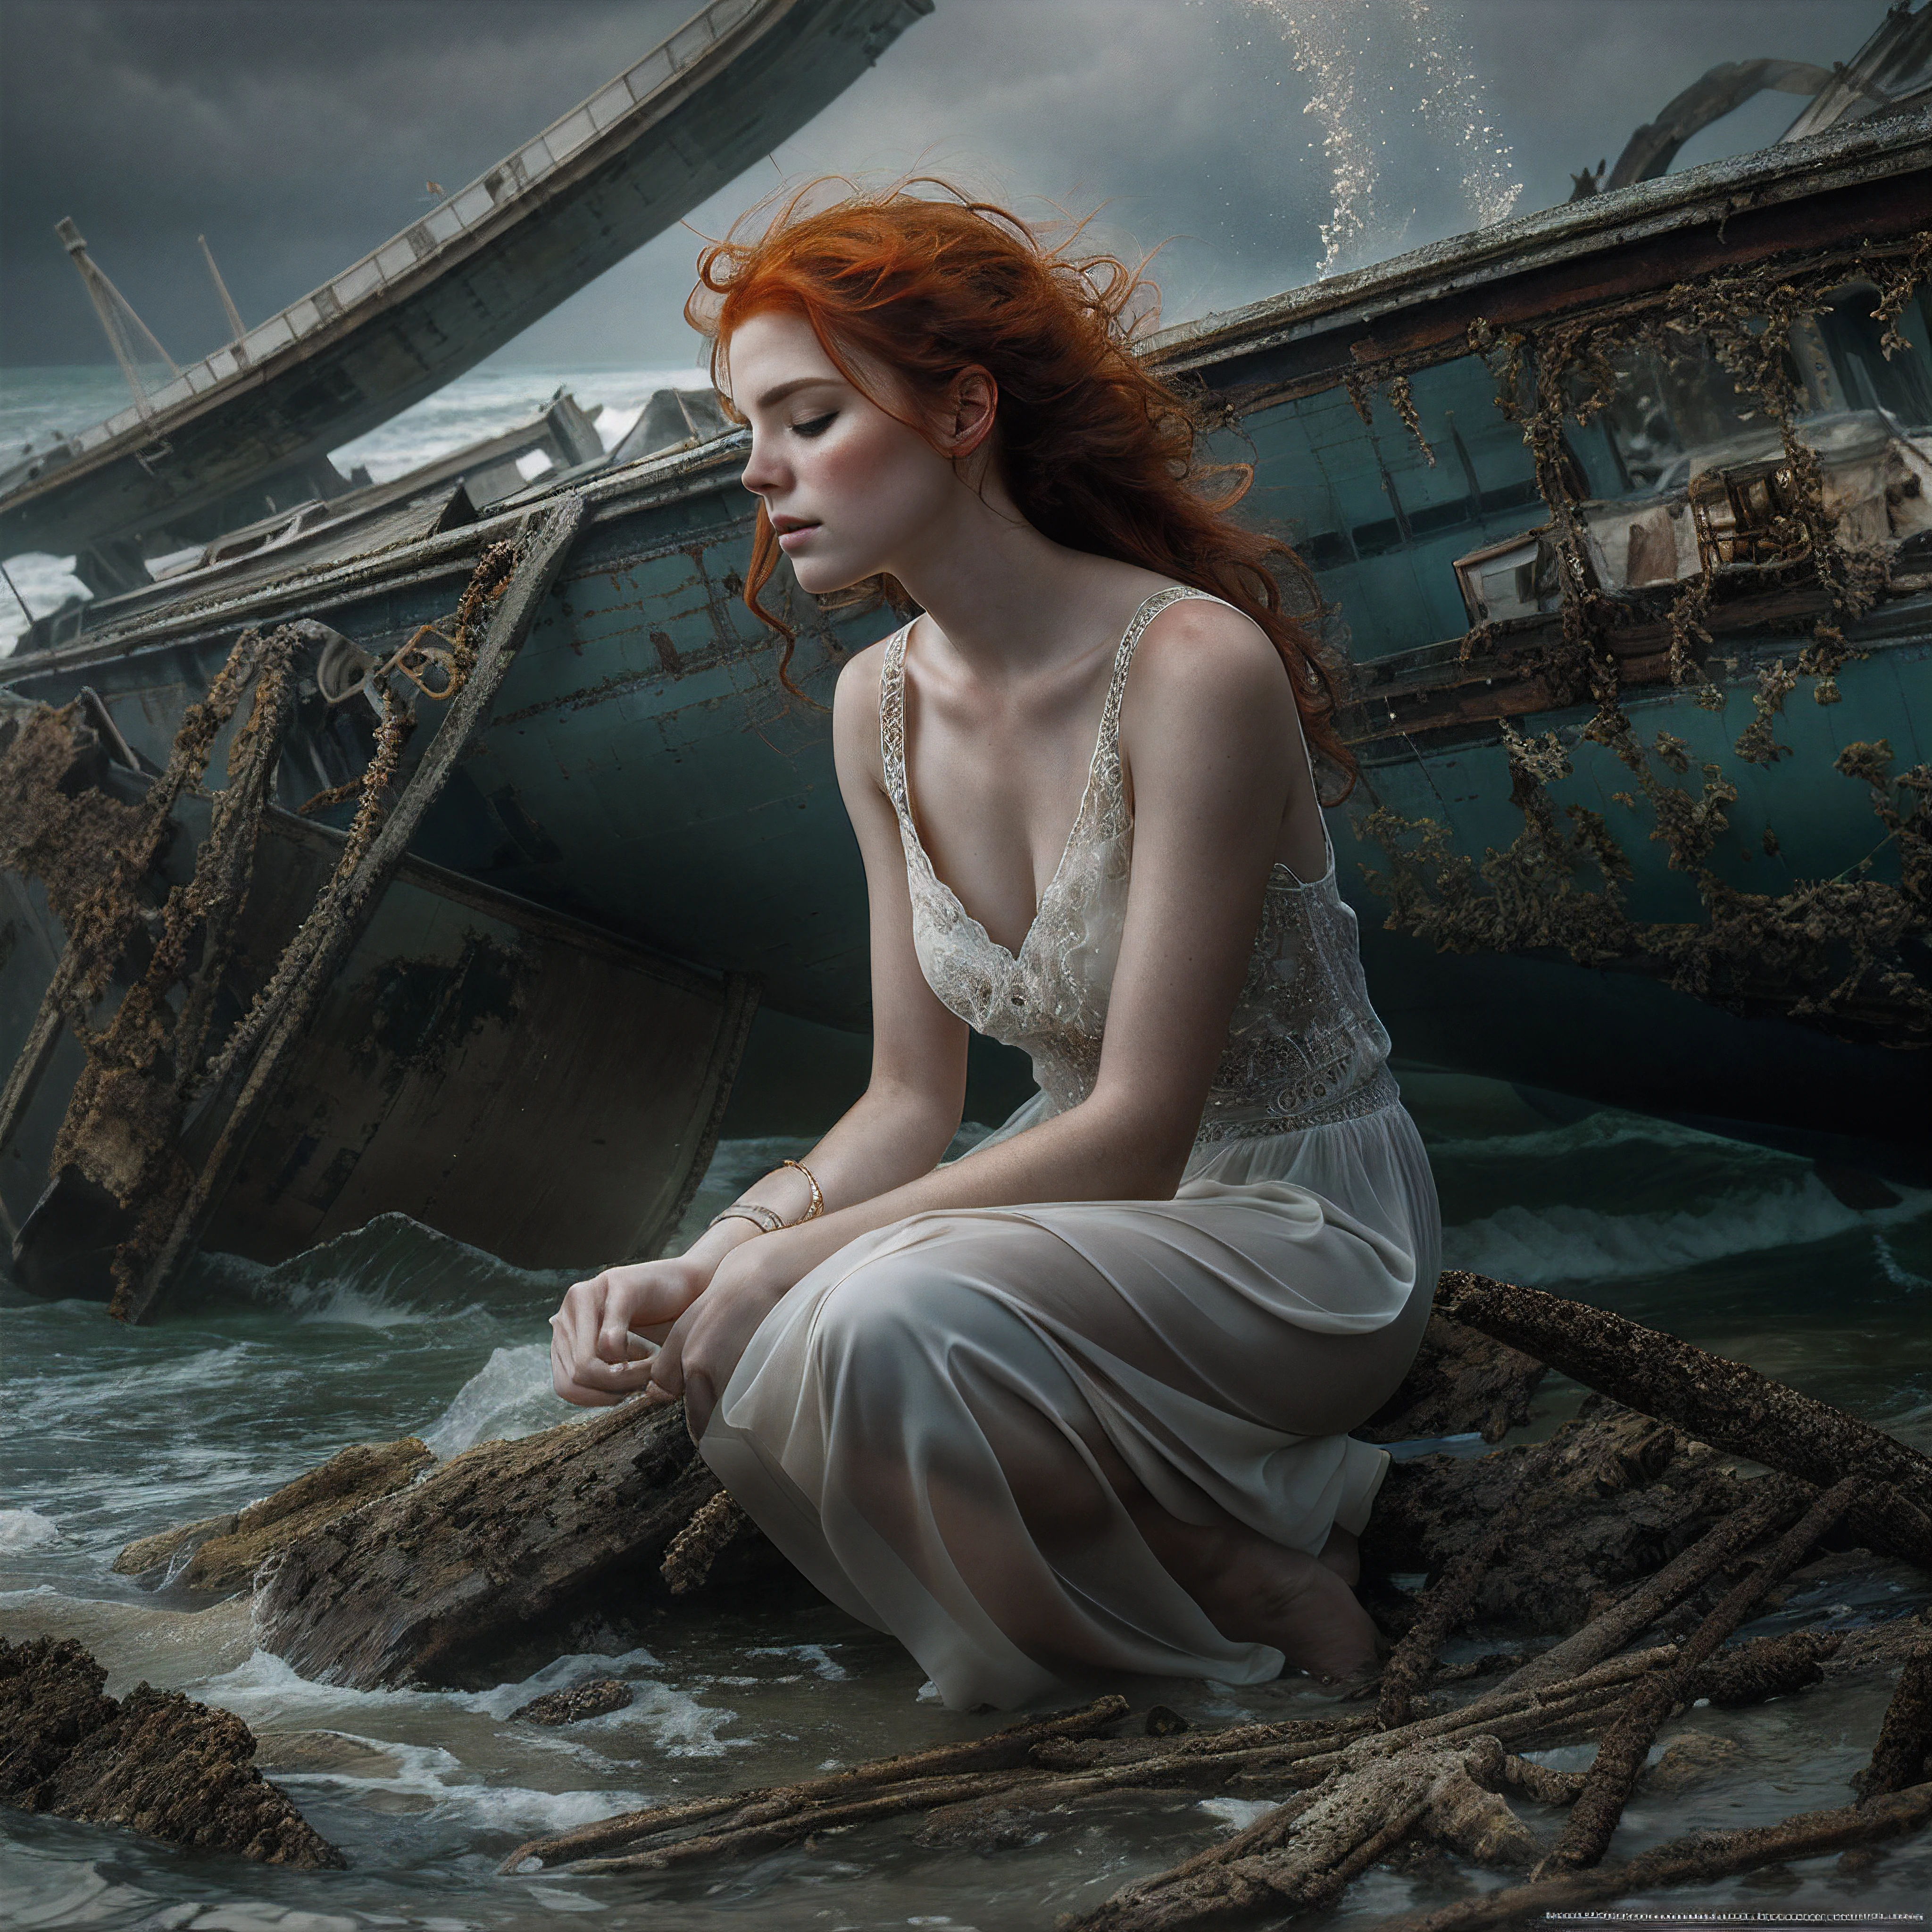 An exquisite portrait depicting a beautiful redheaded woman kneeling peacefully amidst the remains of a shipwreck, eyes closed in pensive thought, delicate features caressed by ocean mist, flawless skin adorned with endearing freckles, fiery locks softly blowing in the seabreeze, masterfully composed in the style of a fine art photographic print, tonality rich and atmospherically moody like a cinematic still, intricate textures and film grain integrated seamlessly, overall craftsmanship superbly executed with extraordinary attention to detail, this profound digital painting epitomizes photorealism meets imaginative artistry.